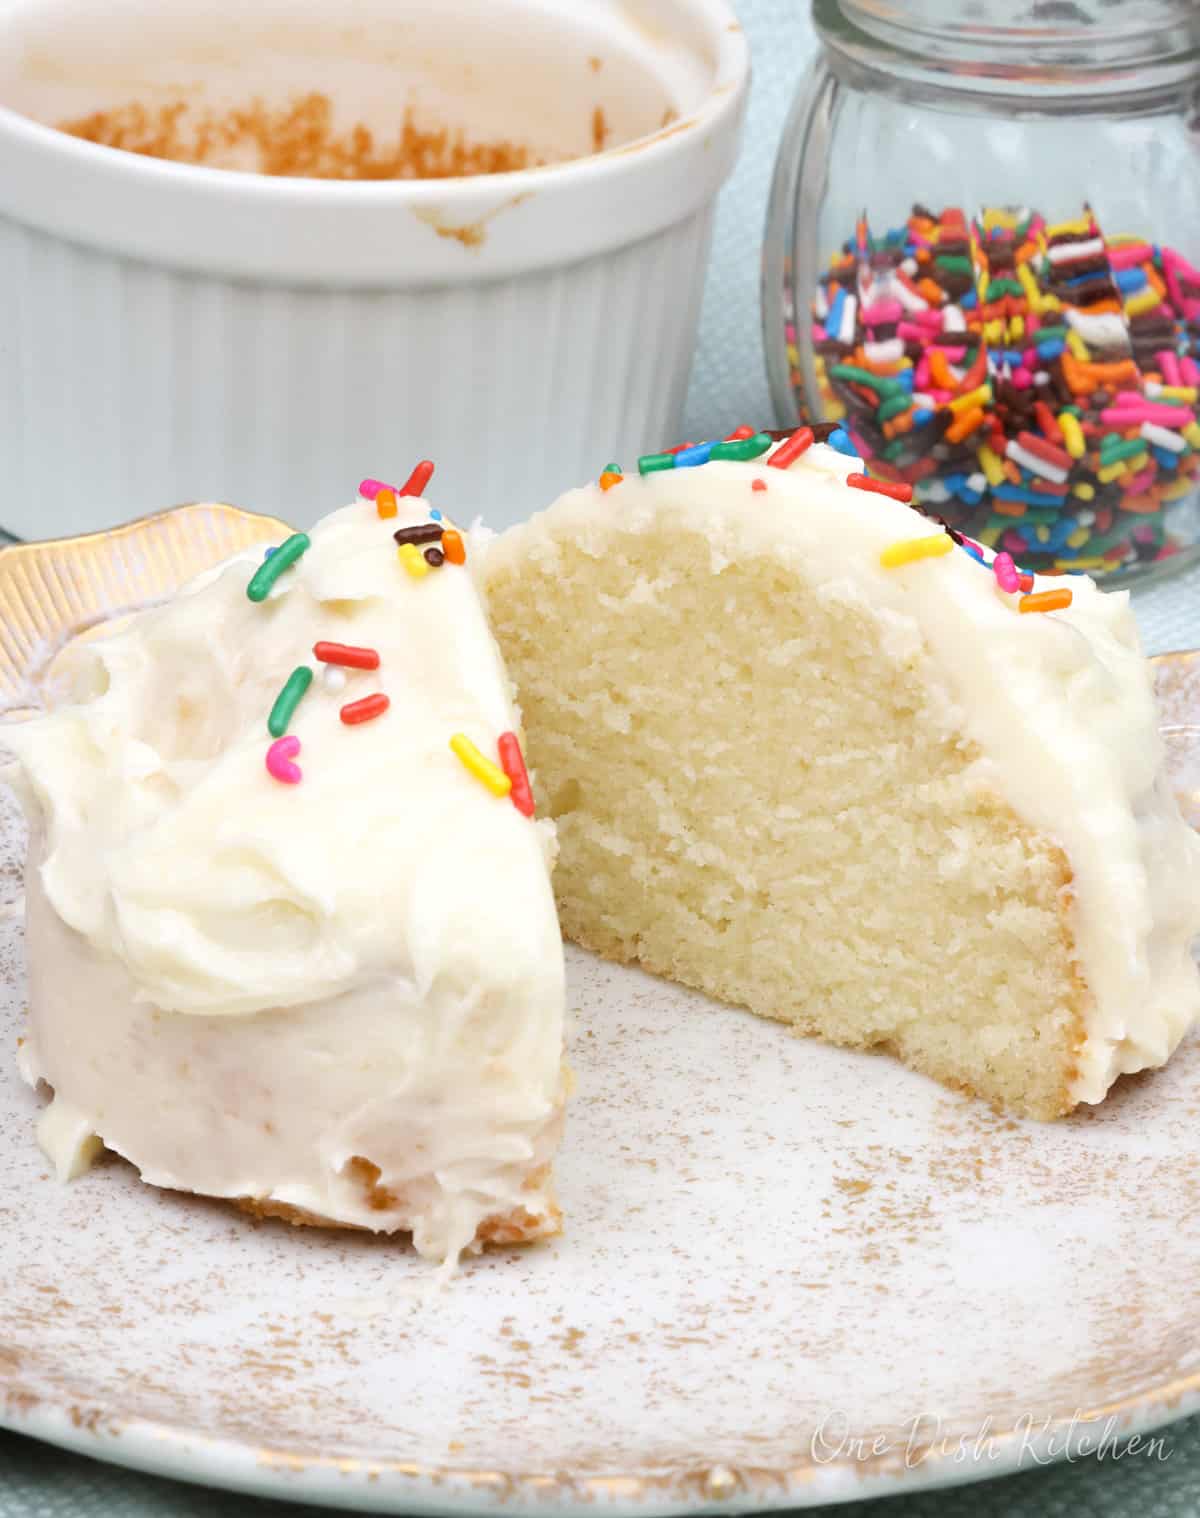 a slice of white cake on a plate next to a jar of sprinkles.